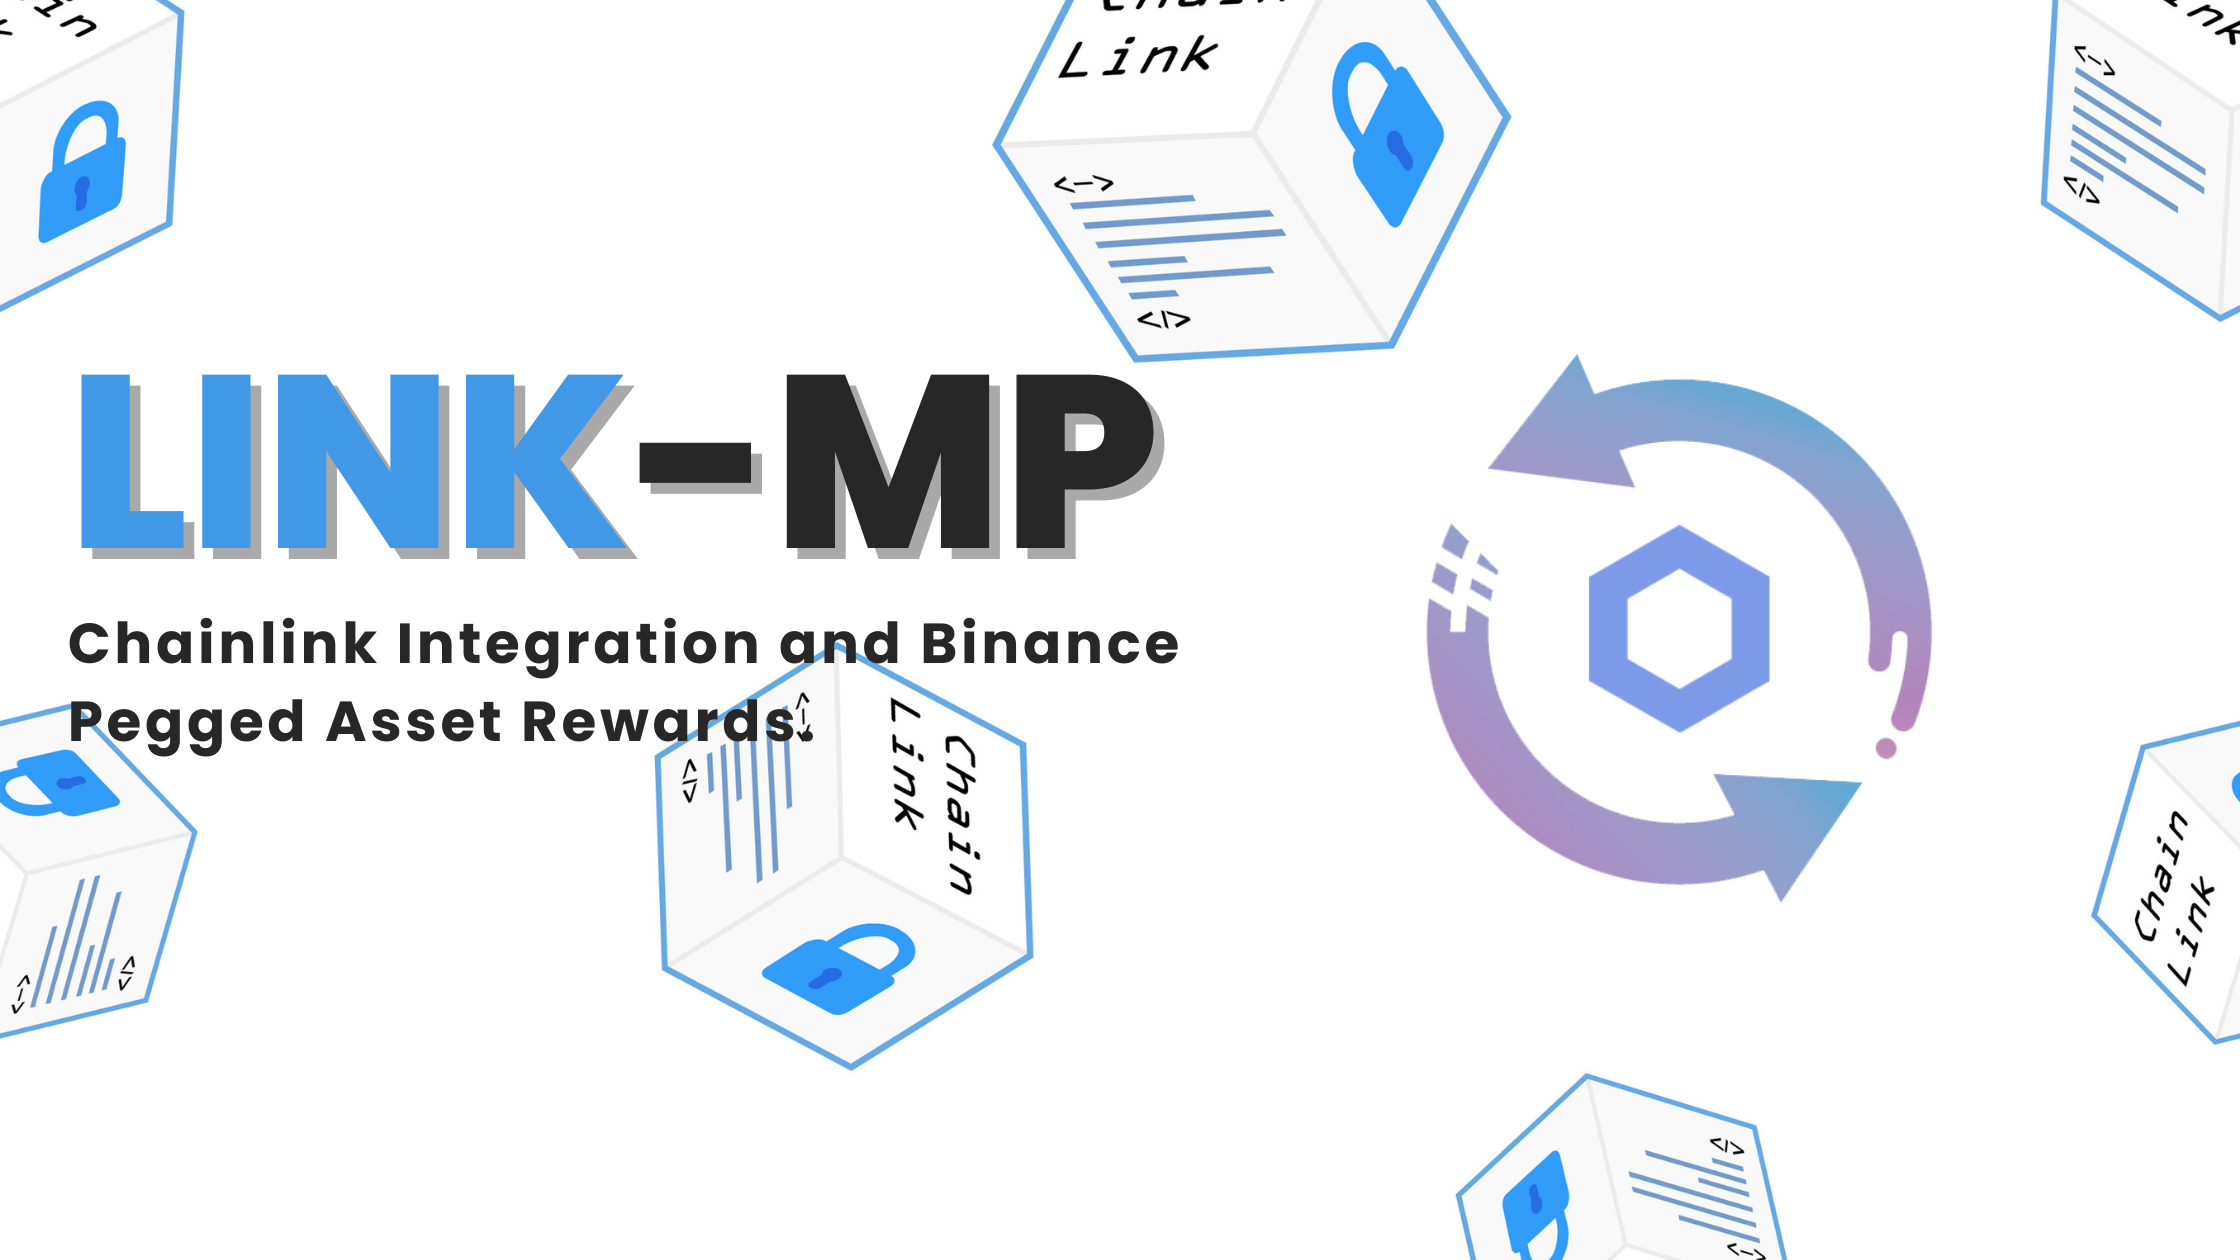 LINK-MP Revolutionizing DeFi with Chainlink Integration and Binance Pegged Asset Rewards